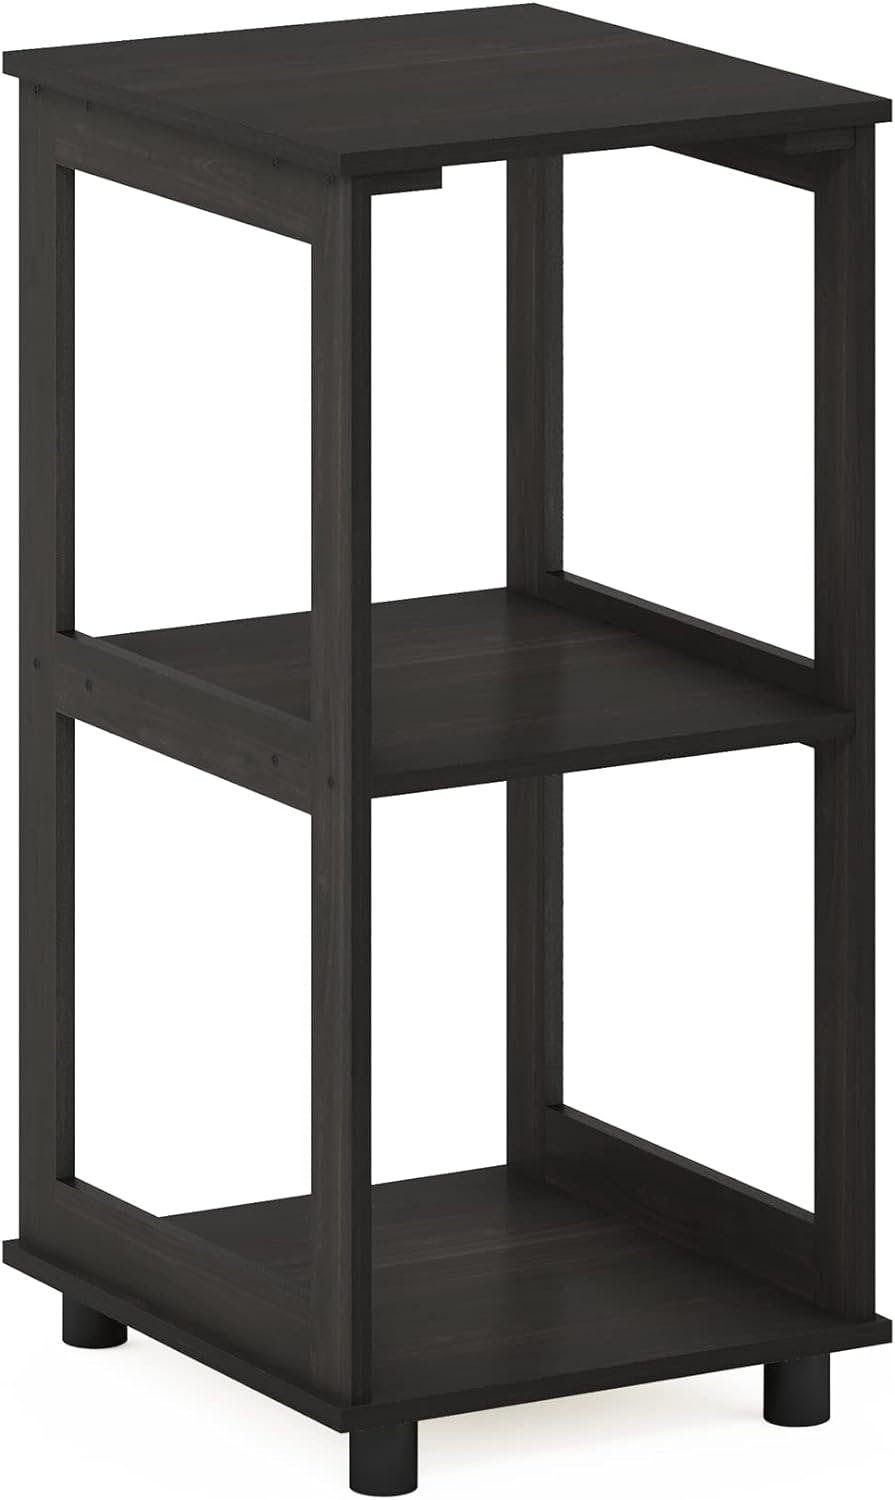 Espresso Composite Wood 2-Tier Tall End Table